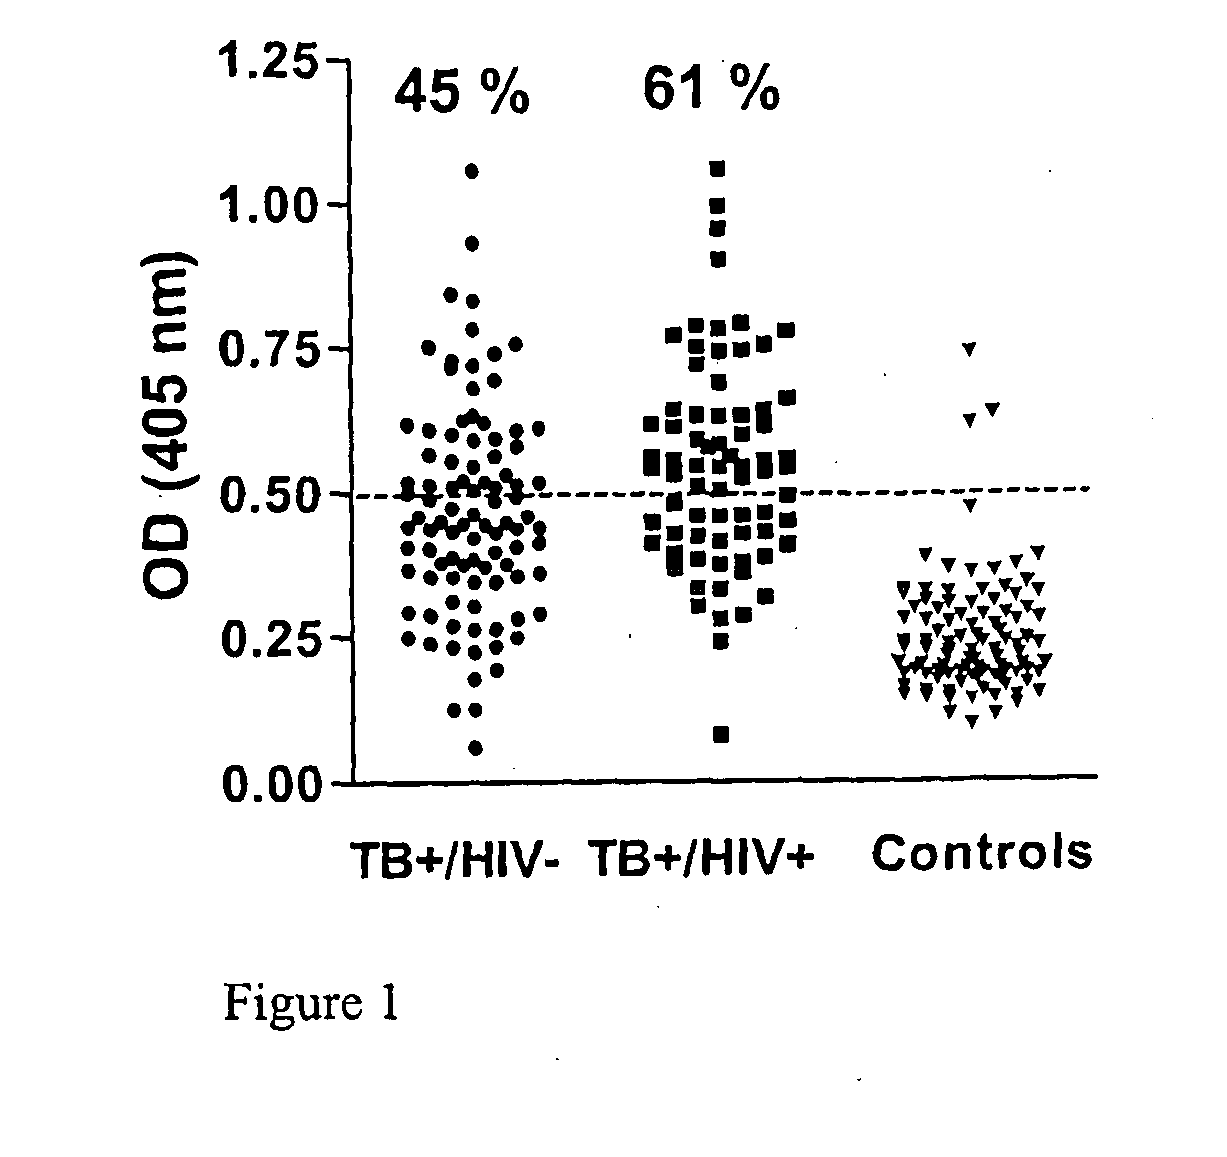 Tuberculosis vaccines comprising antigens expressed during the latent infection phase